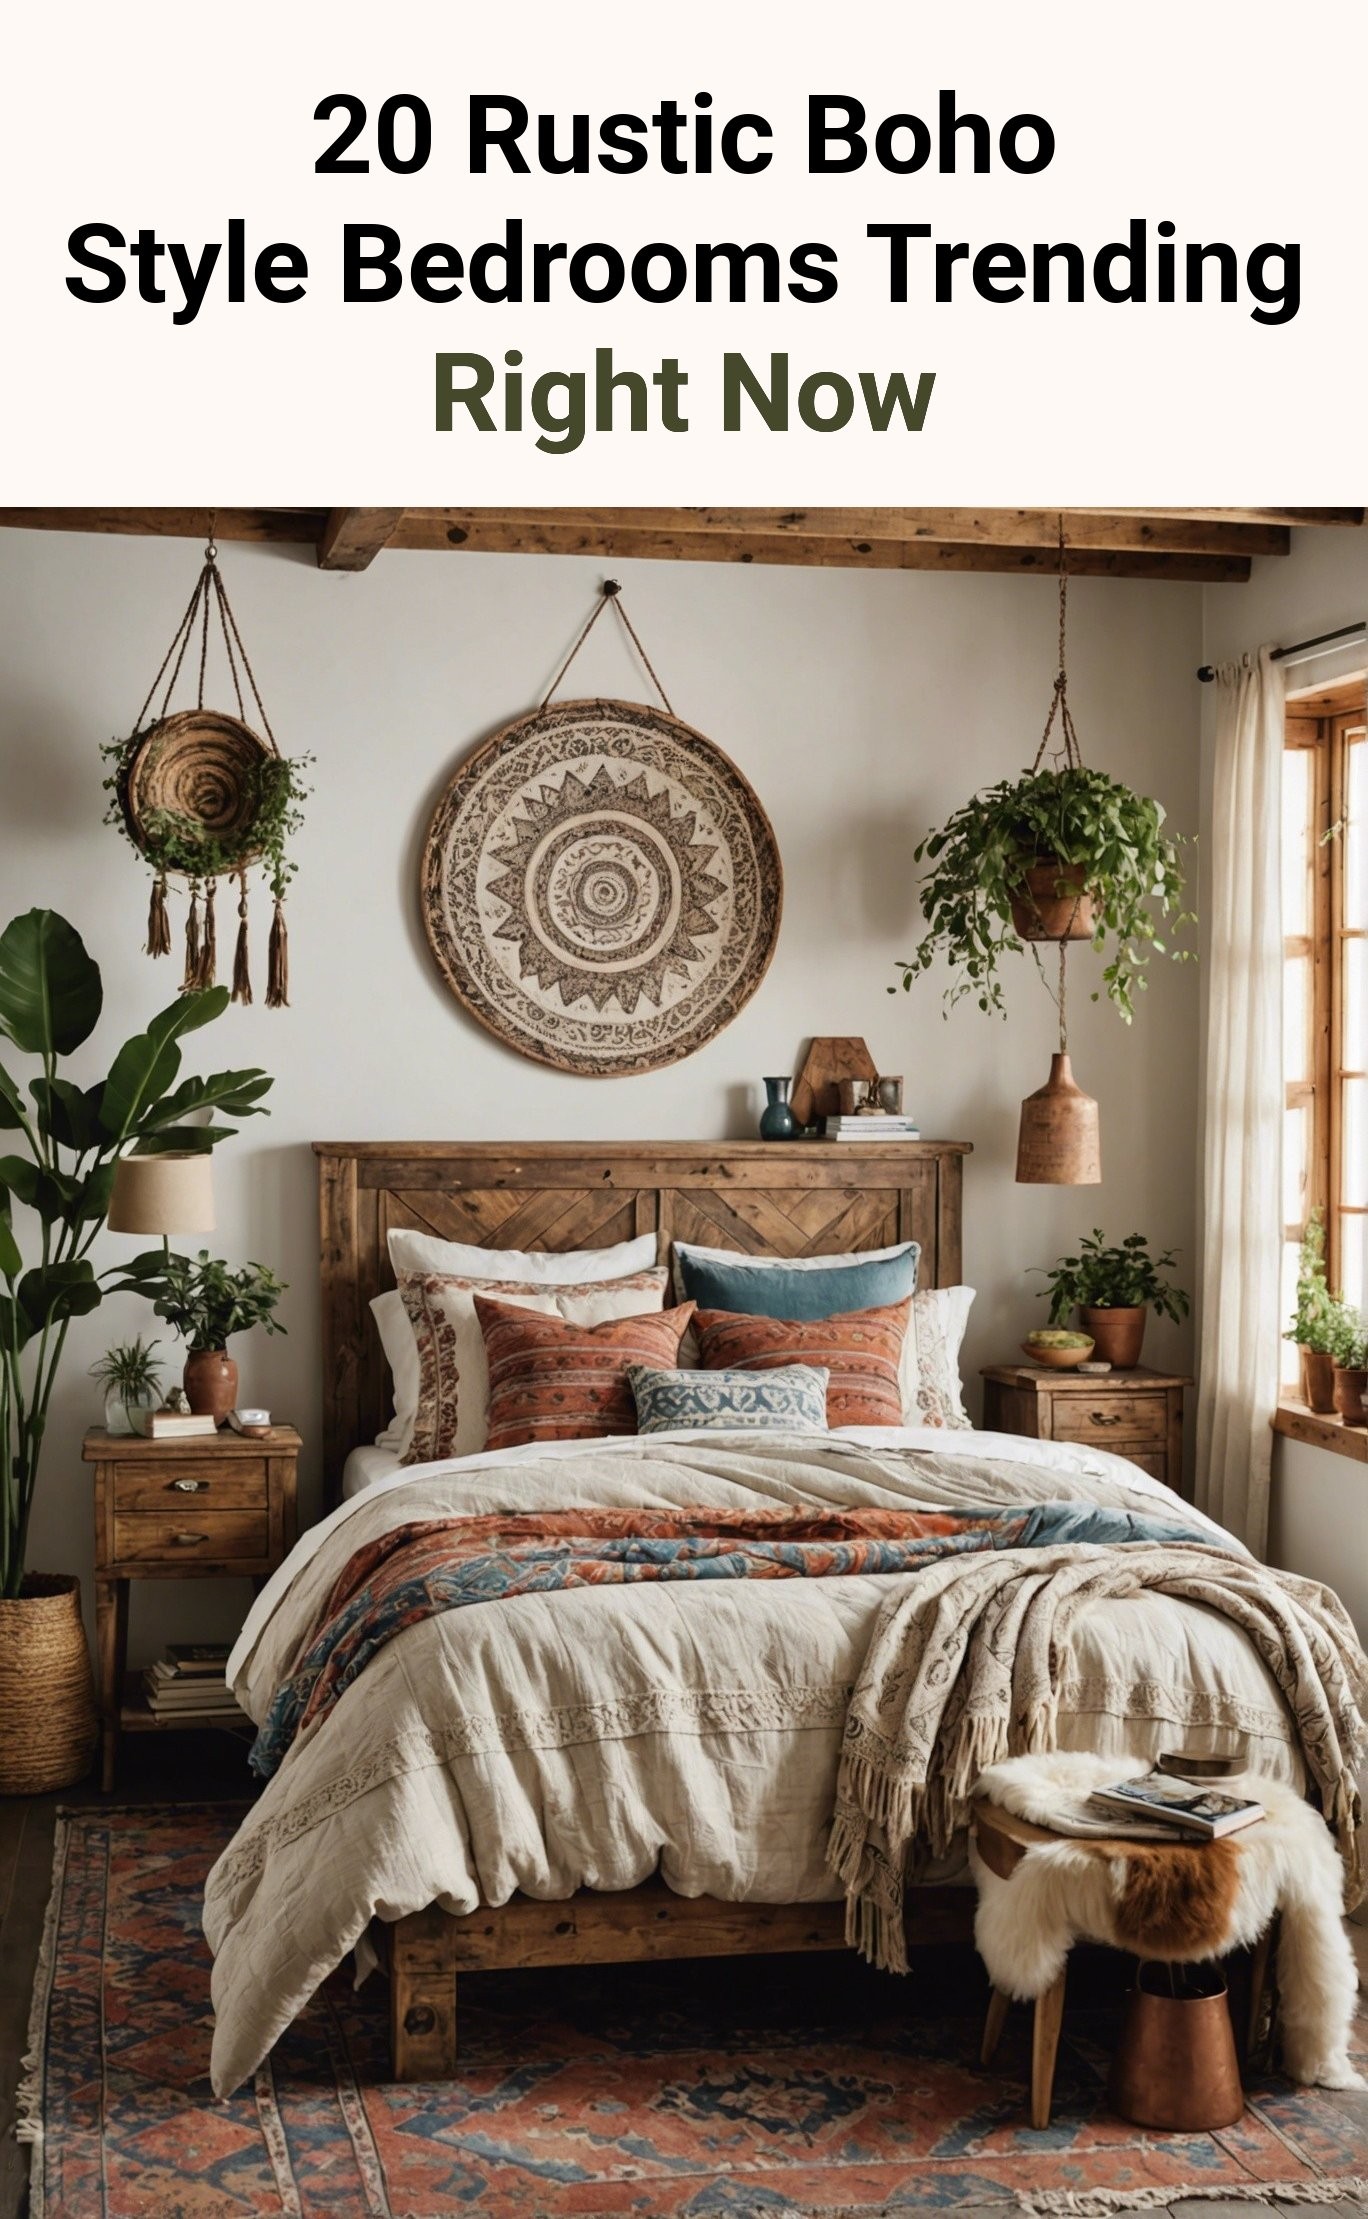 20 Rustic Boho Style Bedrooms Trending Right Now